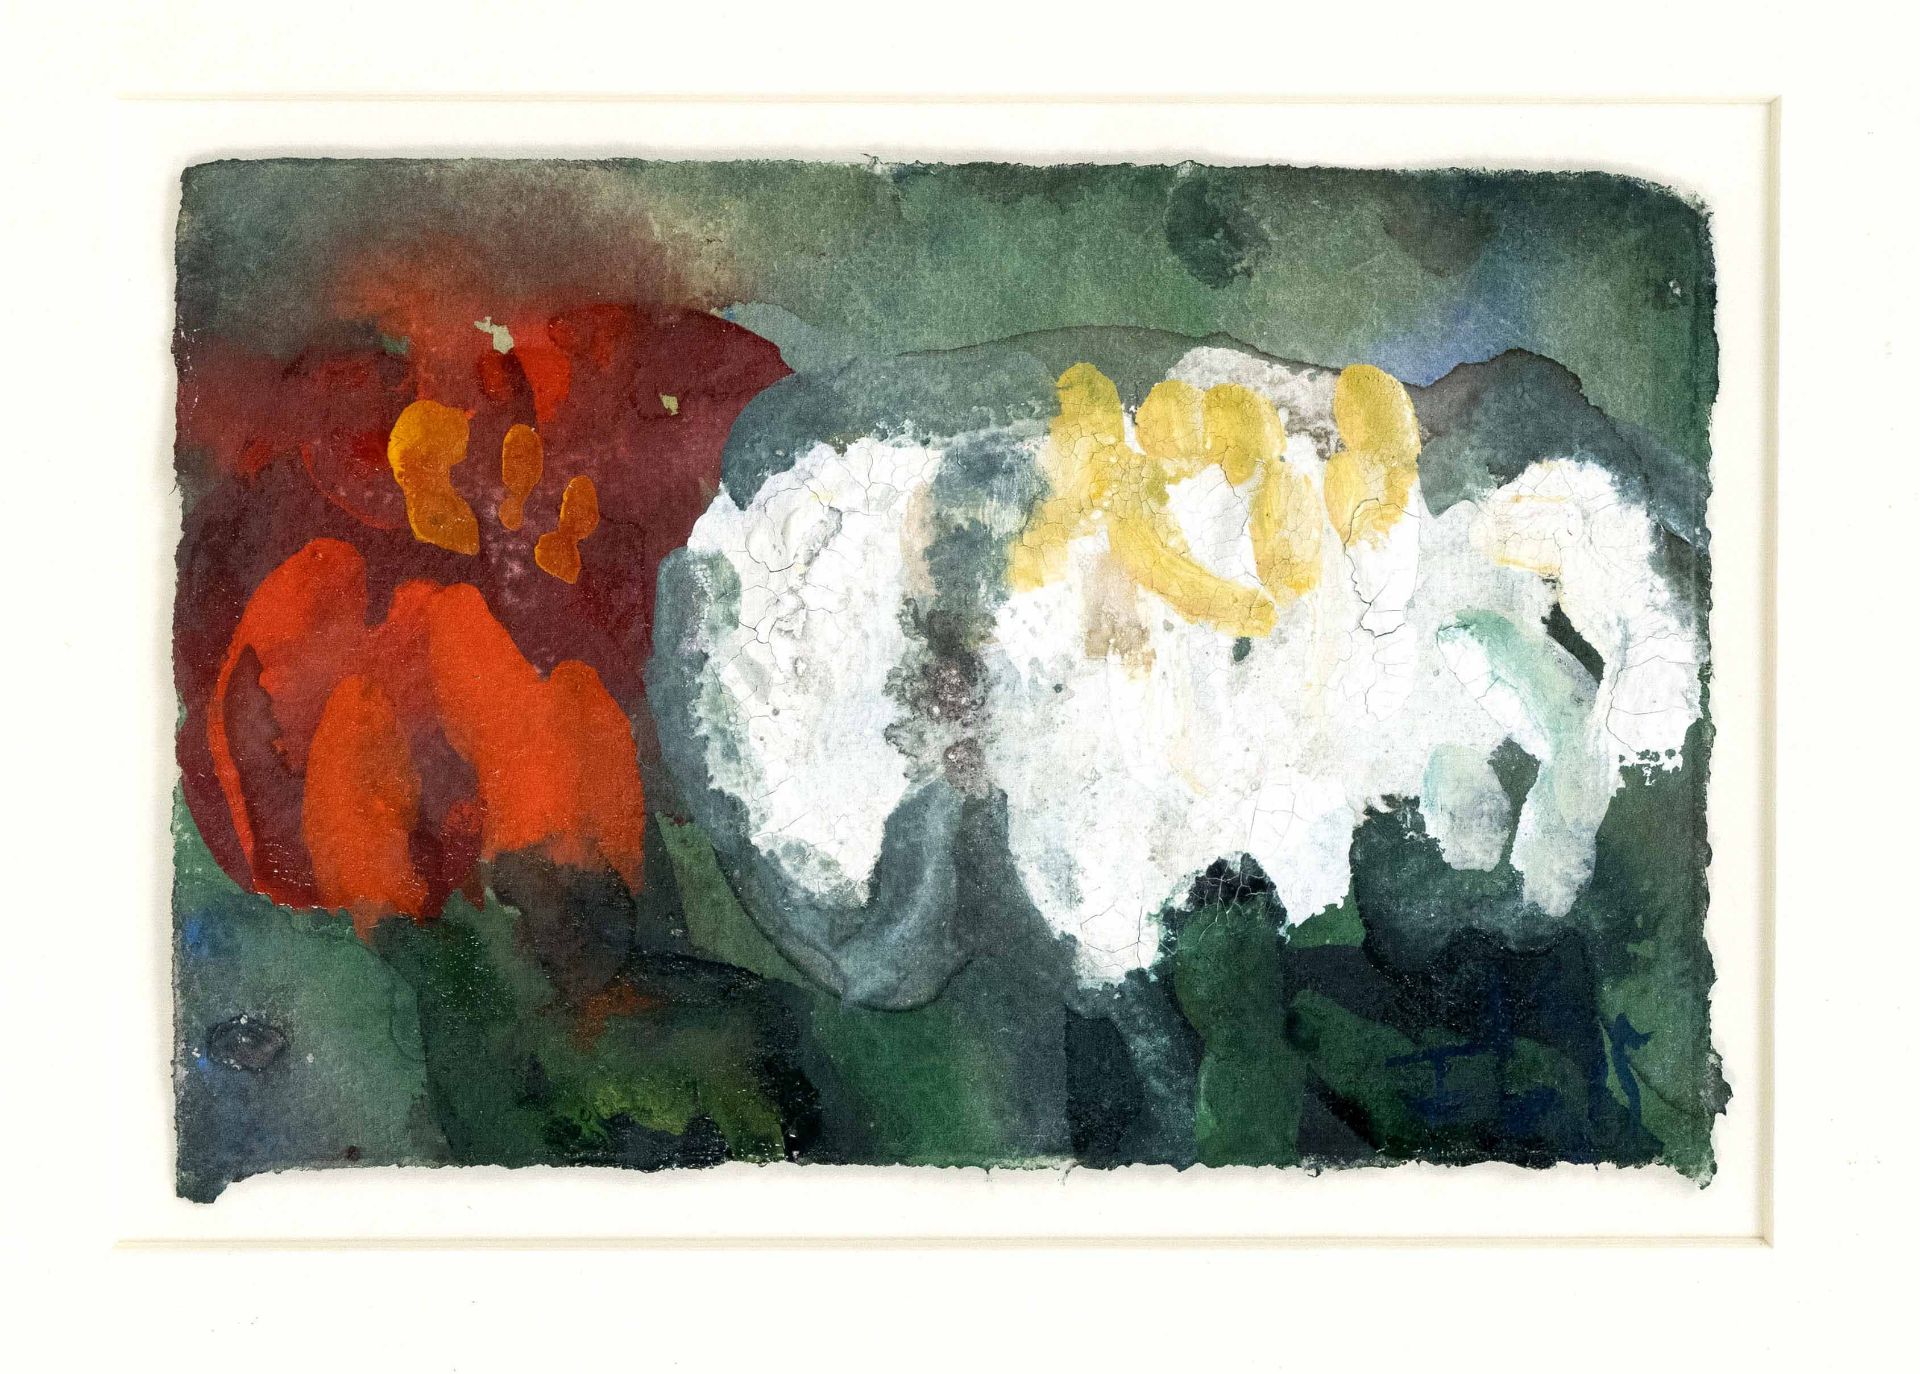 Klaus Fußmann (*1938), flower piece, gouache on handmade paper, bottom right signed and dated (19)95